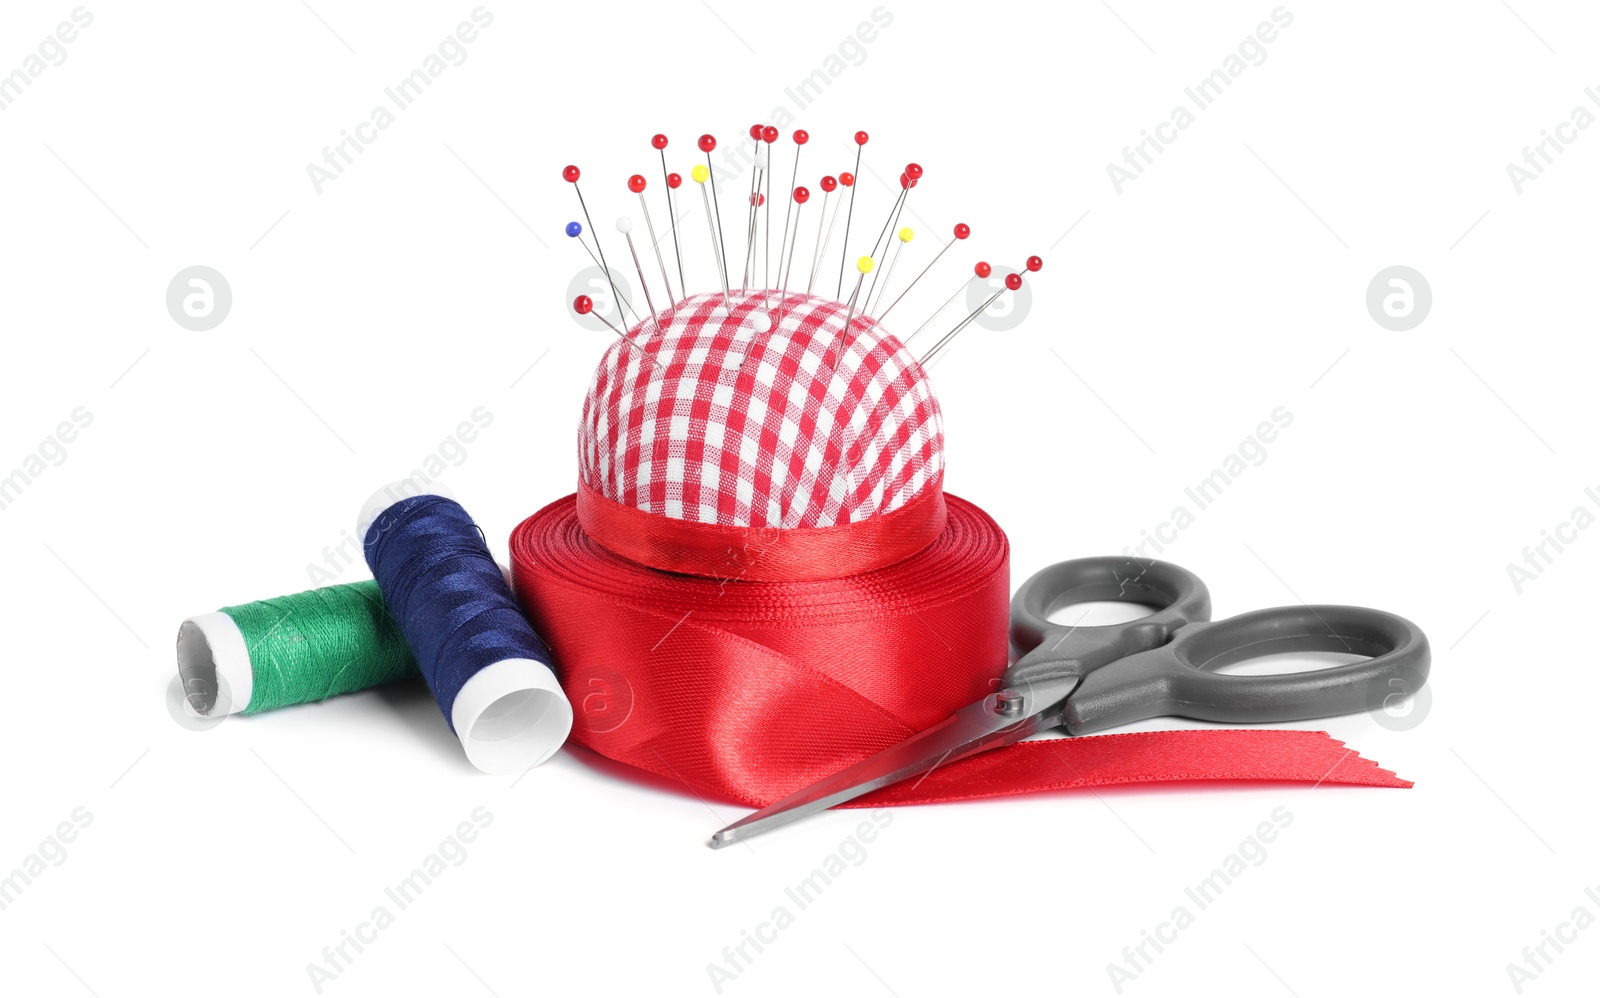 Photo of Checkered pincushion, sewing pins, spools of threads, ribbon and scissors isolated on white